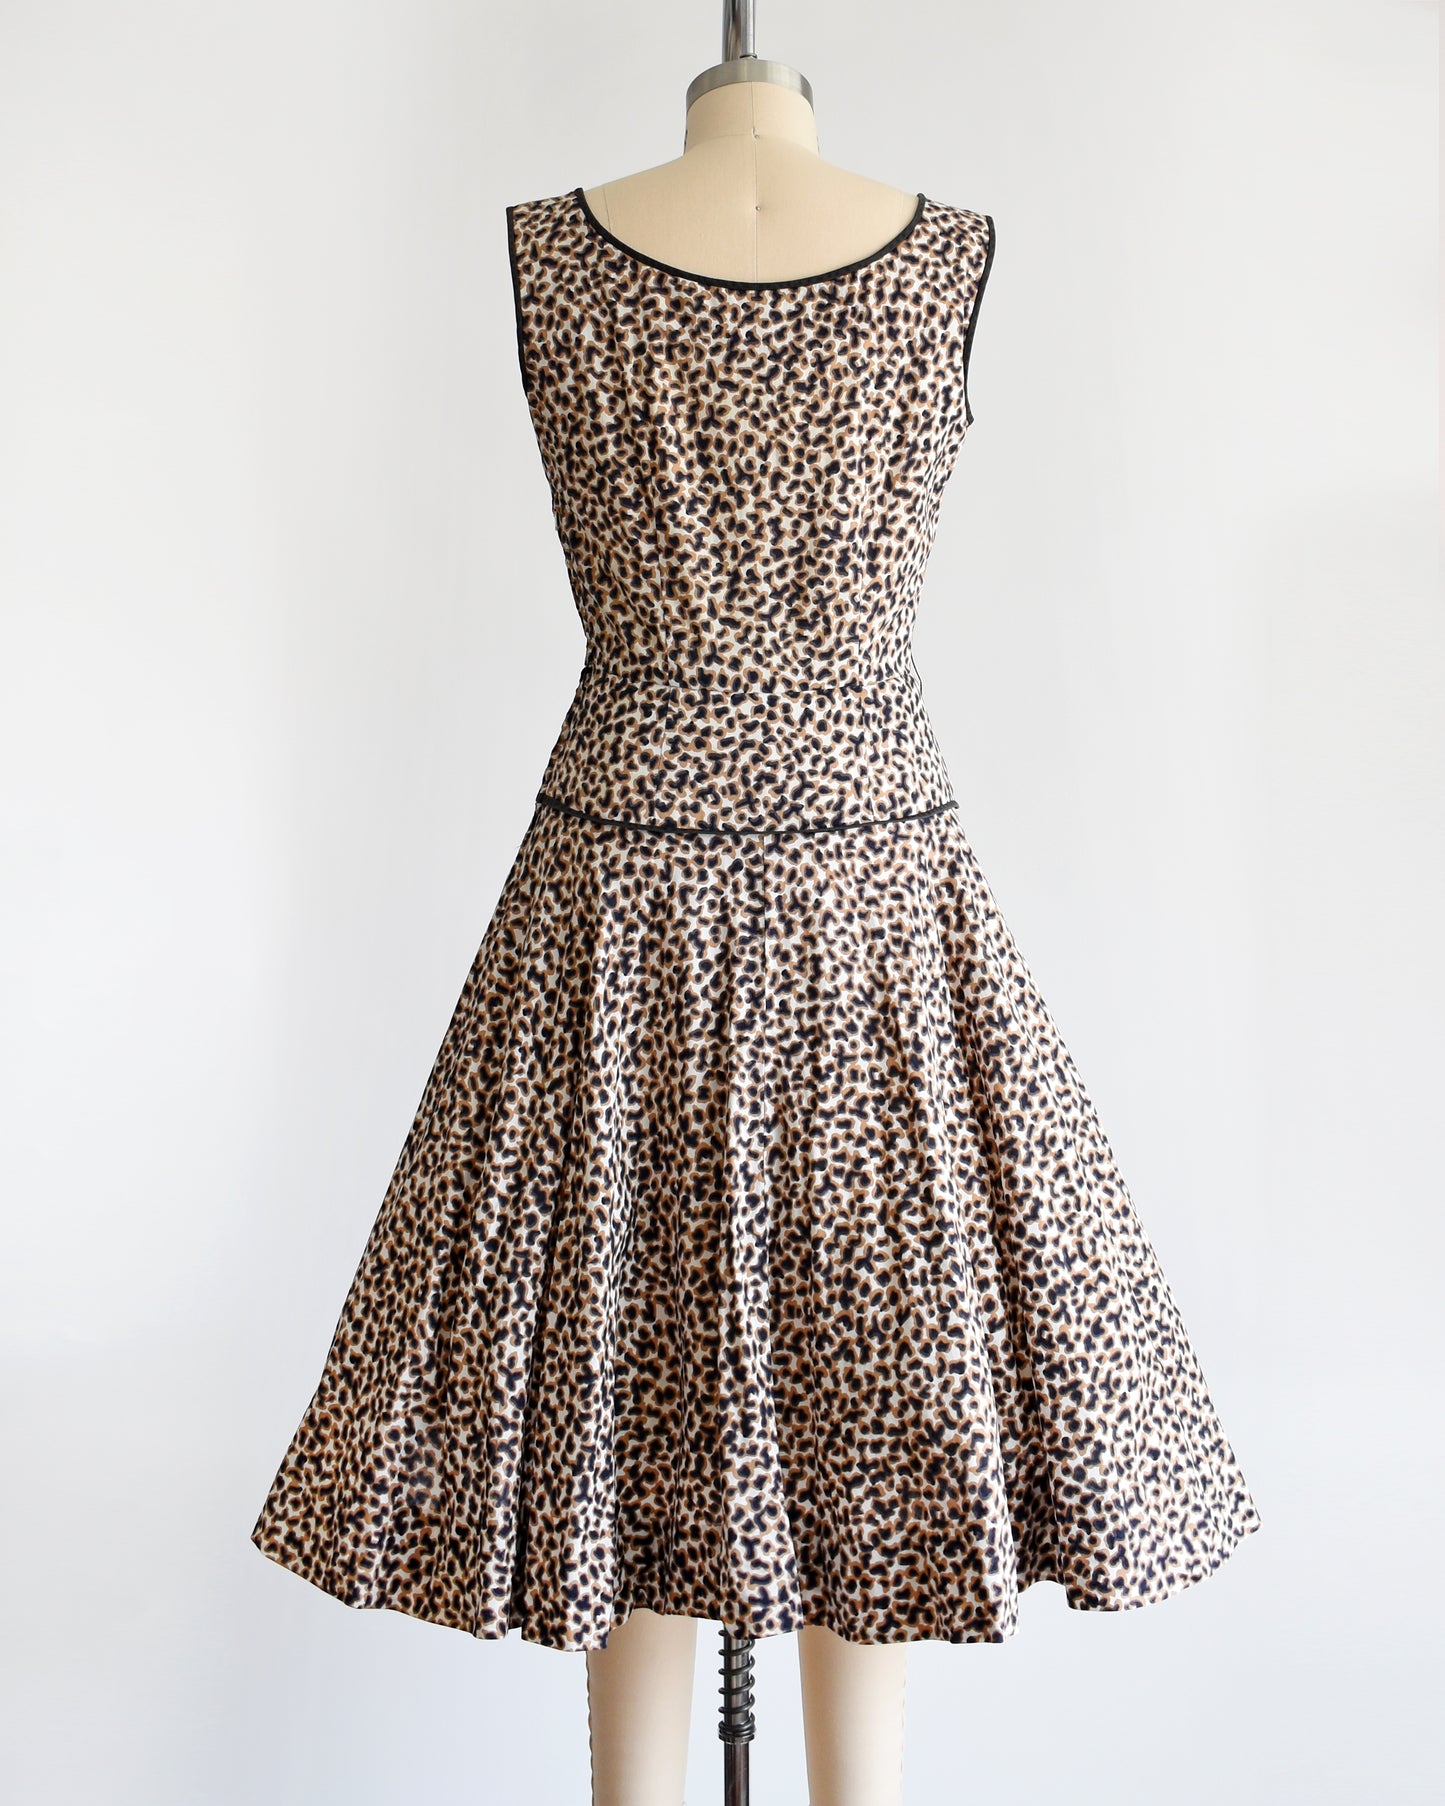 Back view of a vintage 1950s leopard print dress with black trim on a dress form.